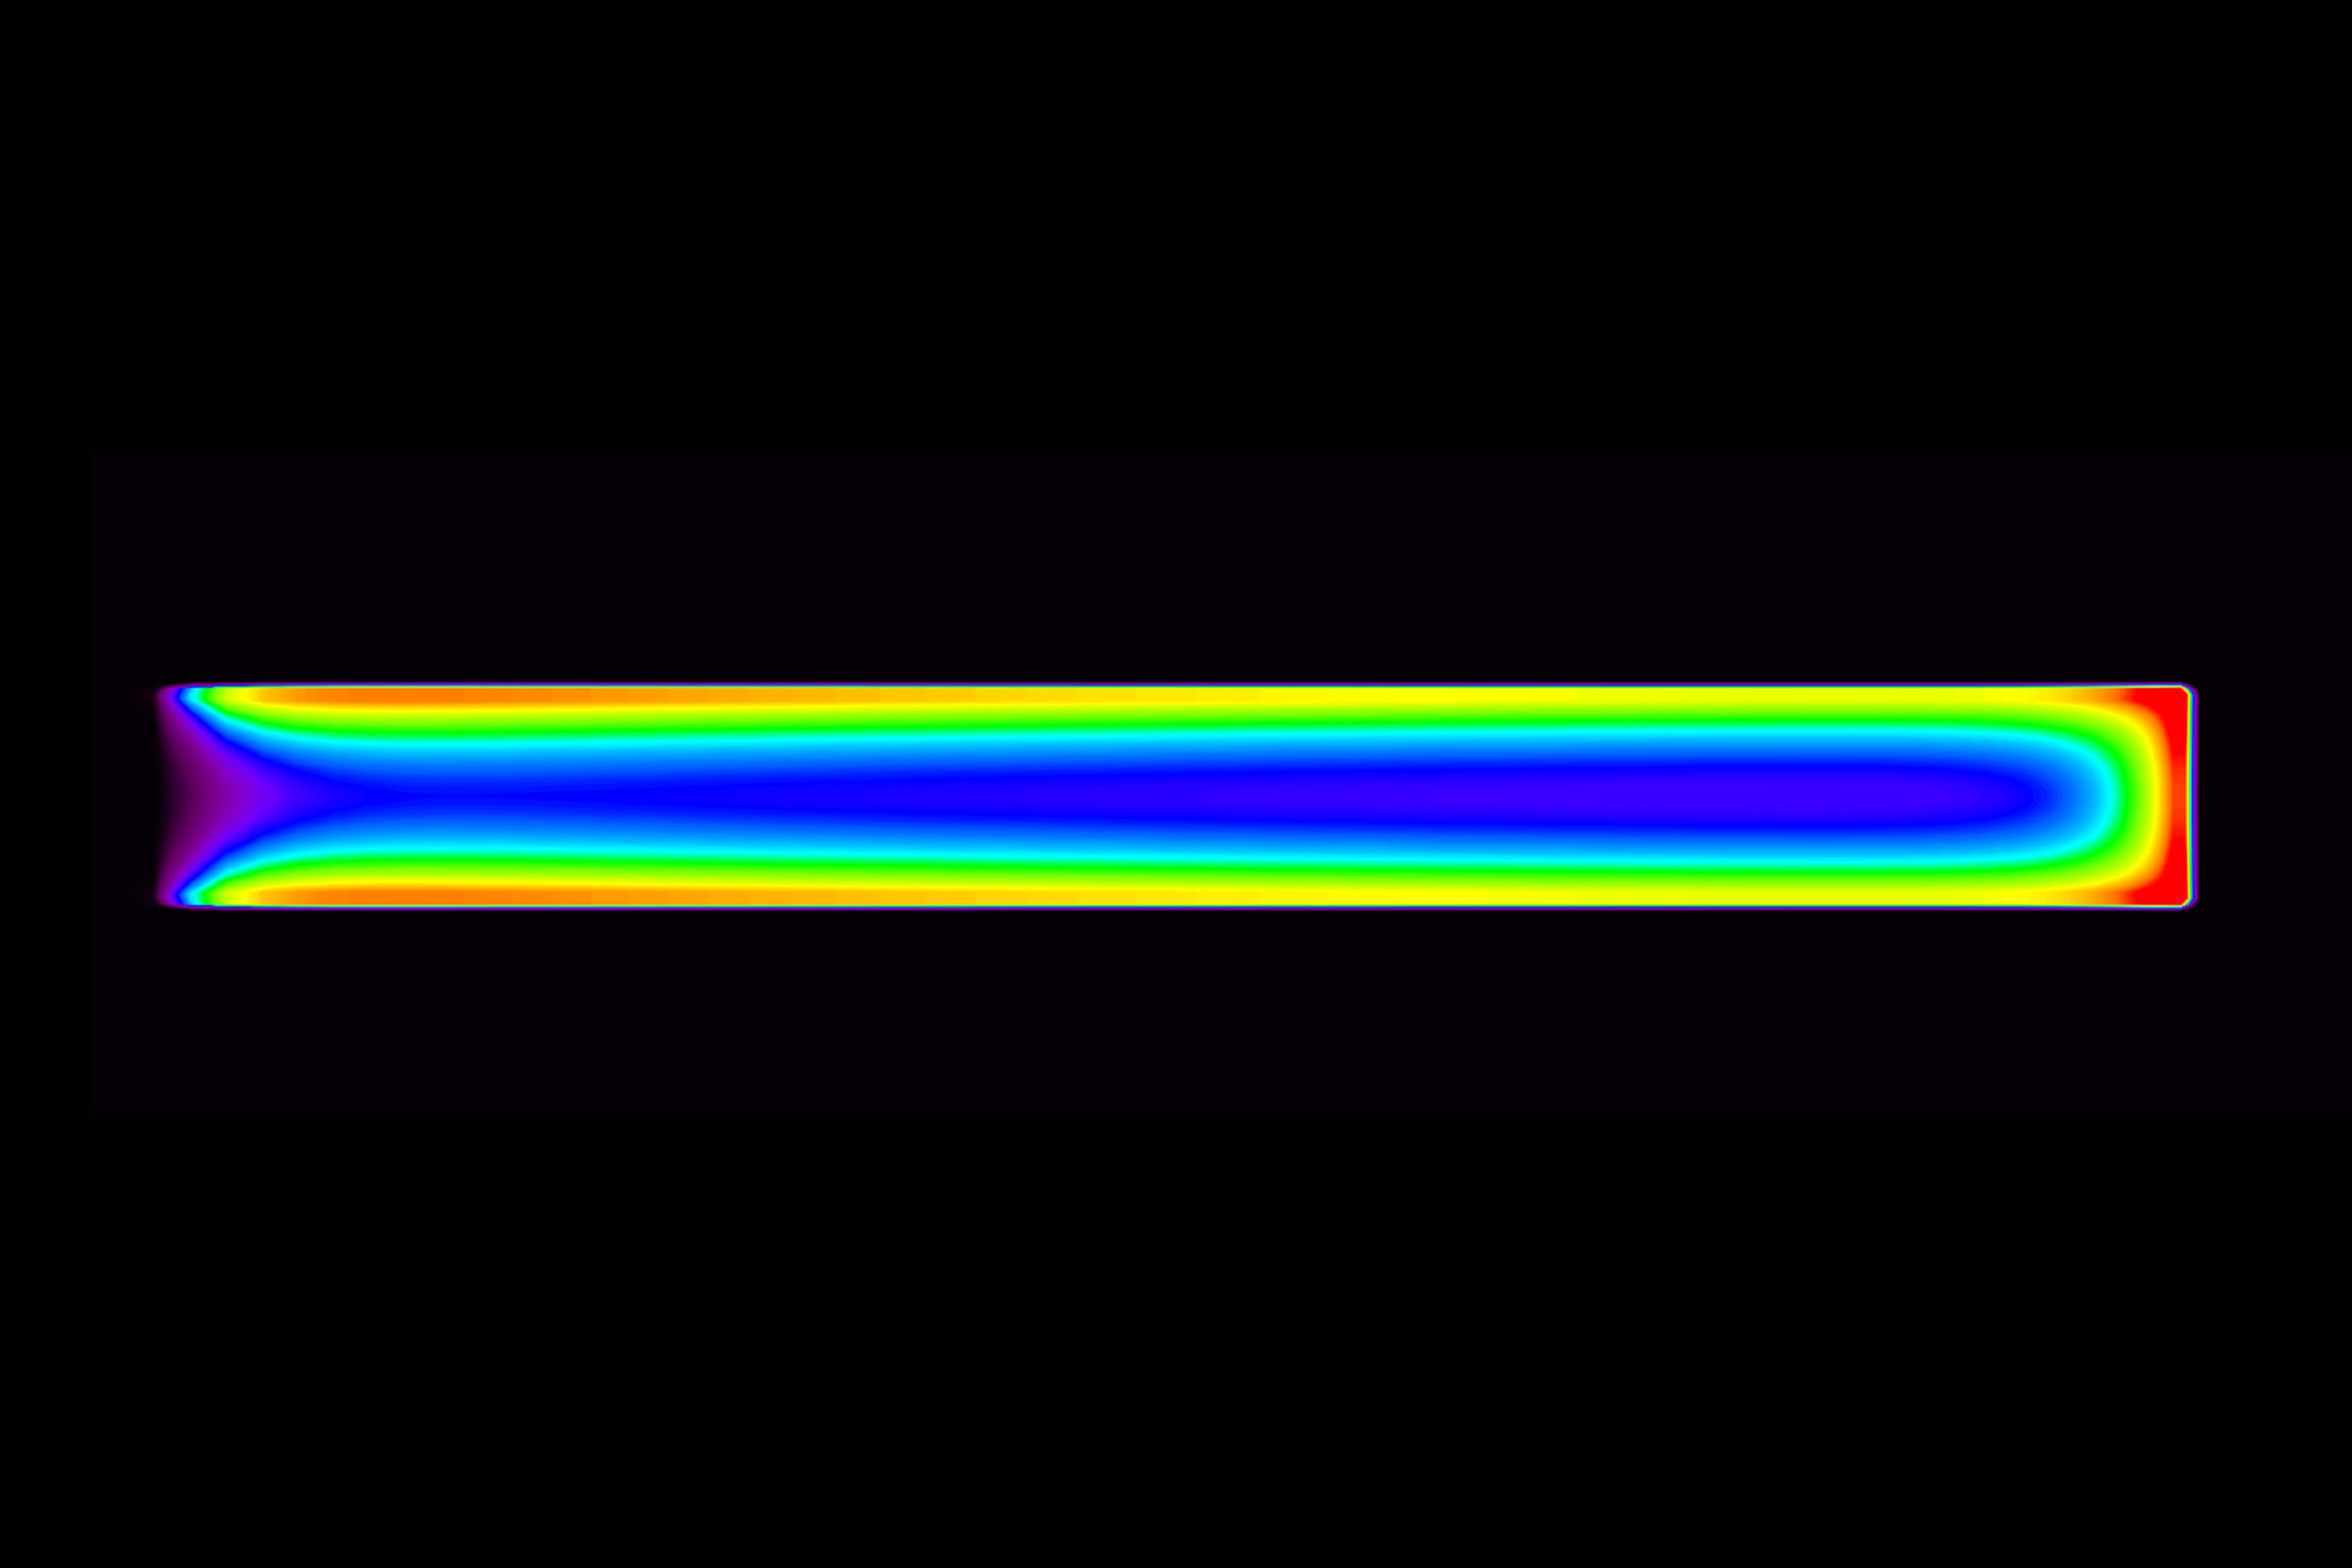 Model of nanowire-based light-emitting diode showing that adding a bit of aluminum to the shell layer (black) directs all recombination of electrons and holes (spaces for electrons) into the nanowire core (multicolored region), producing intense light. Credit: NIST